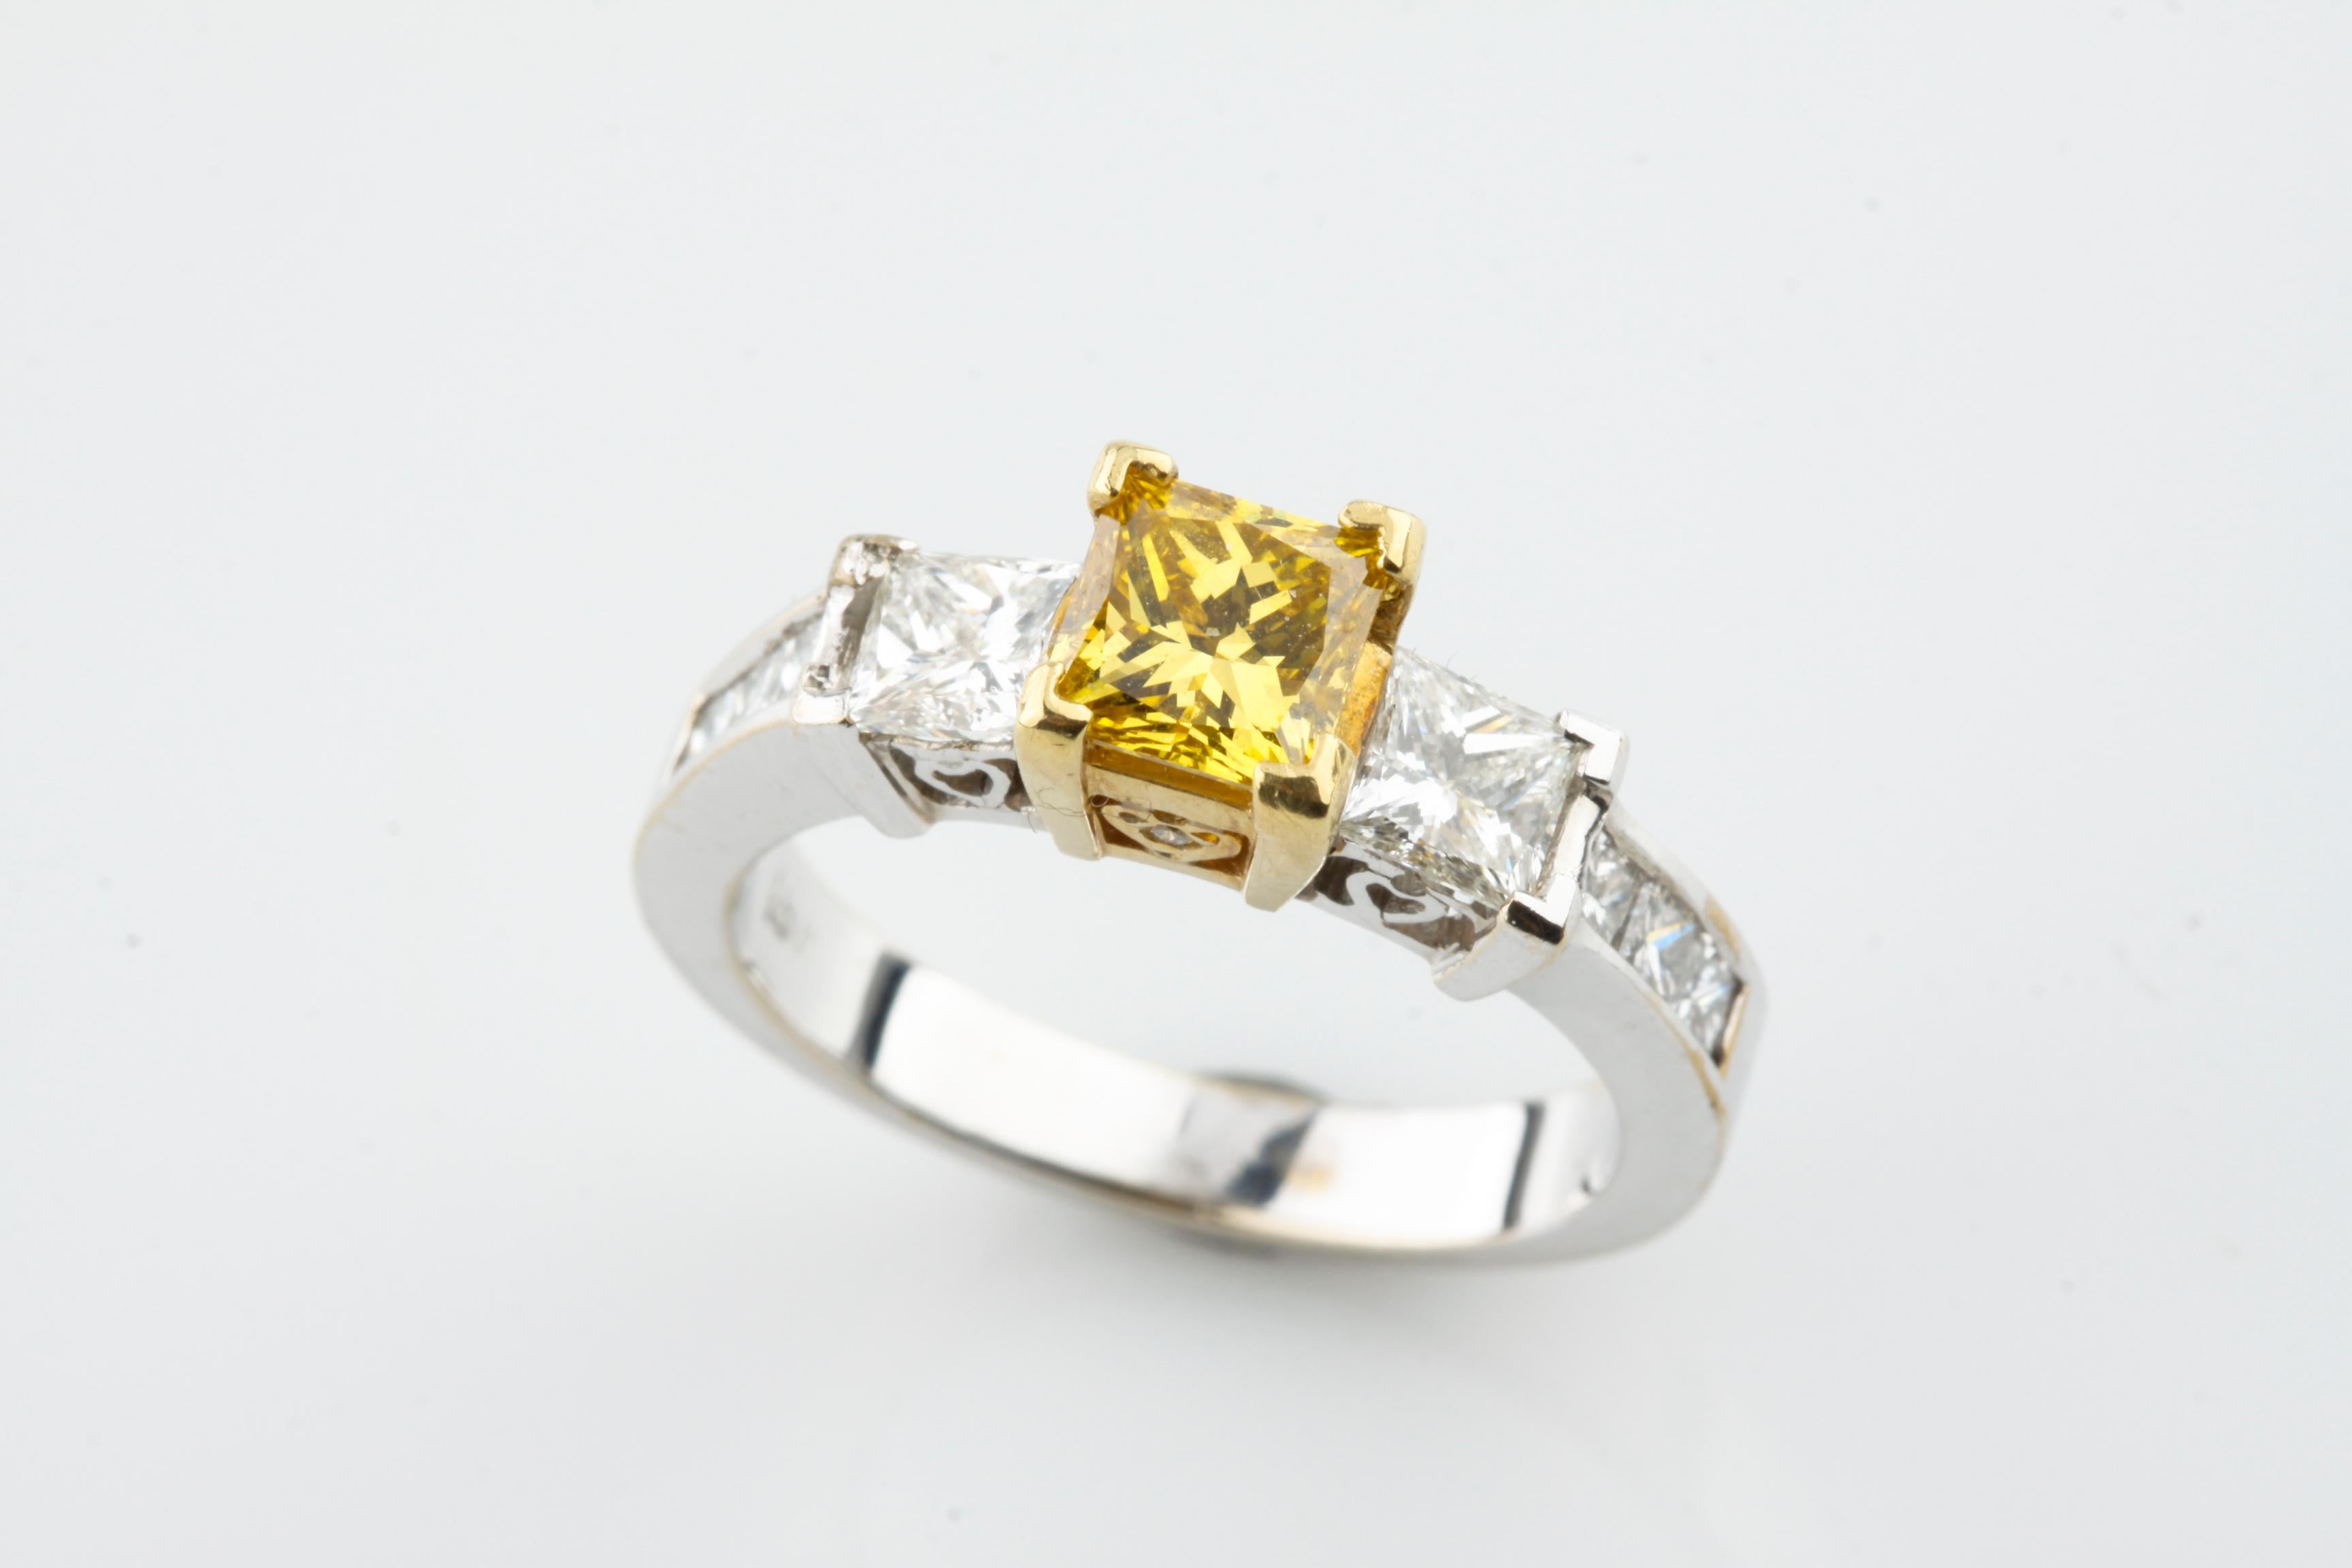 One Electronically tested 18k two-tone white & yellow gold ladies cast & assembled diamond unity ring with a bright finish. Condition is new, good workmanship. Identified with markings of 